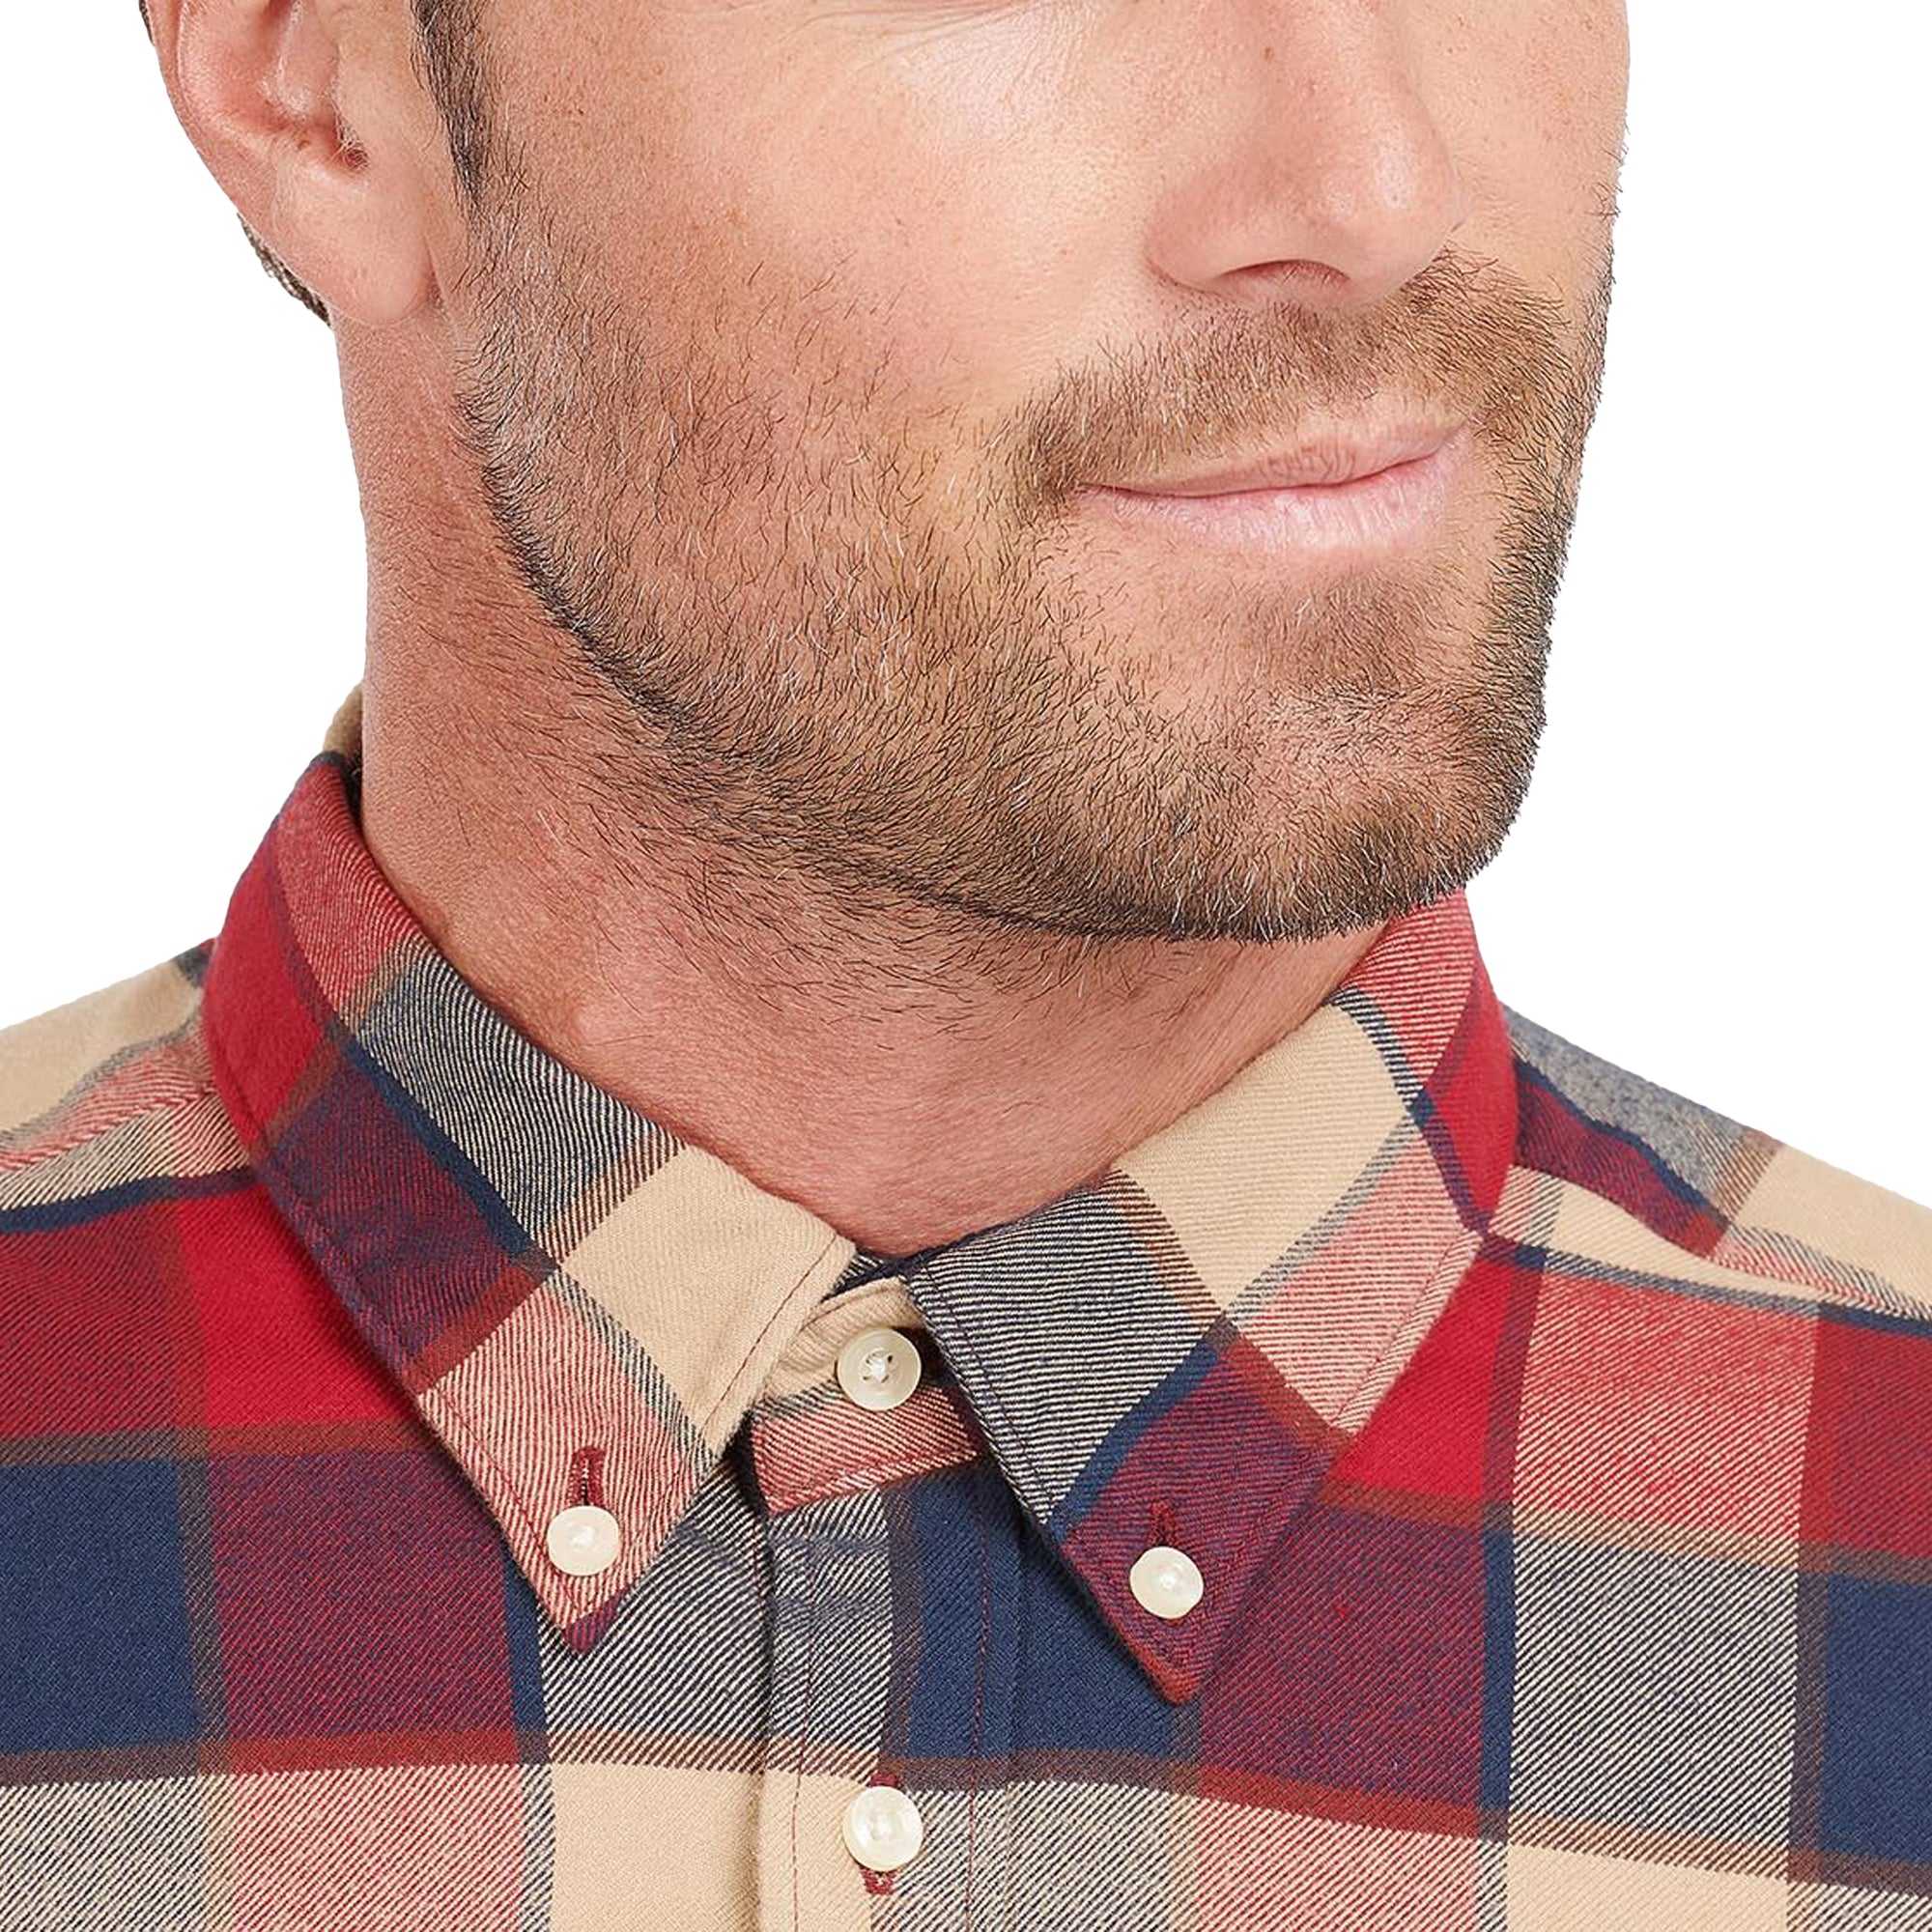 Barbour Valley Tailored Shirt - Rich Red